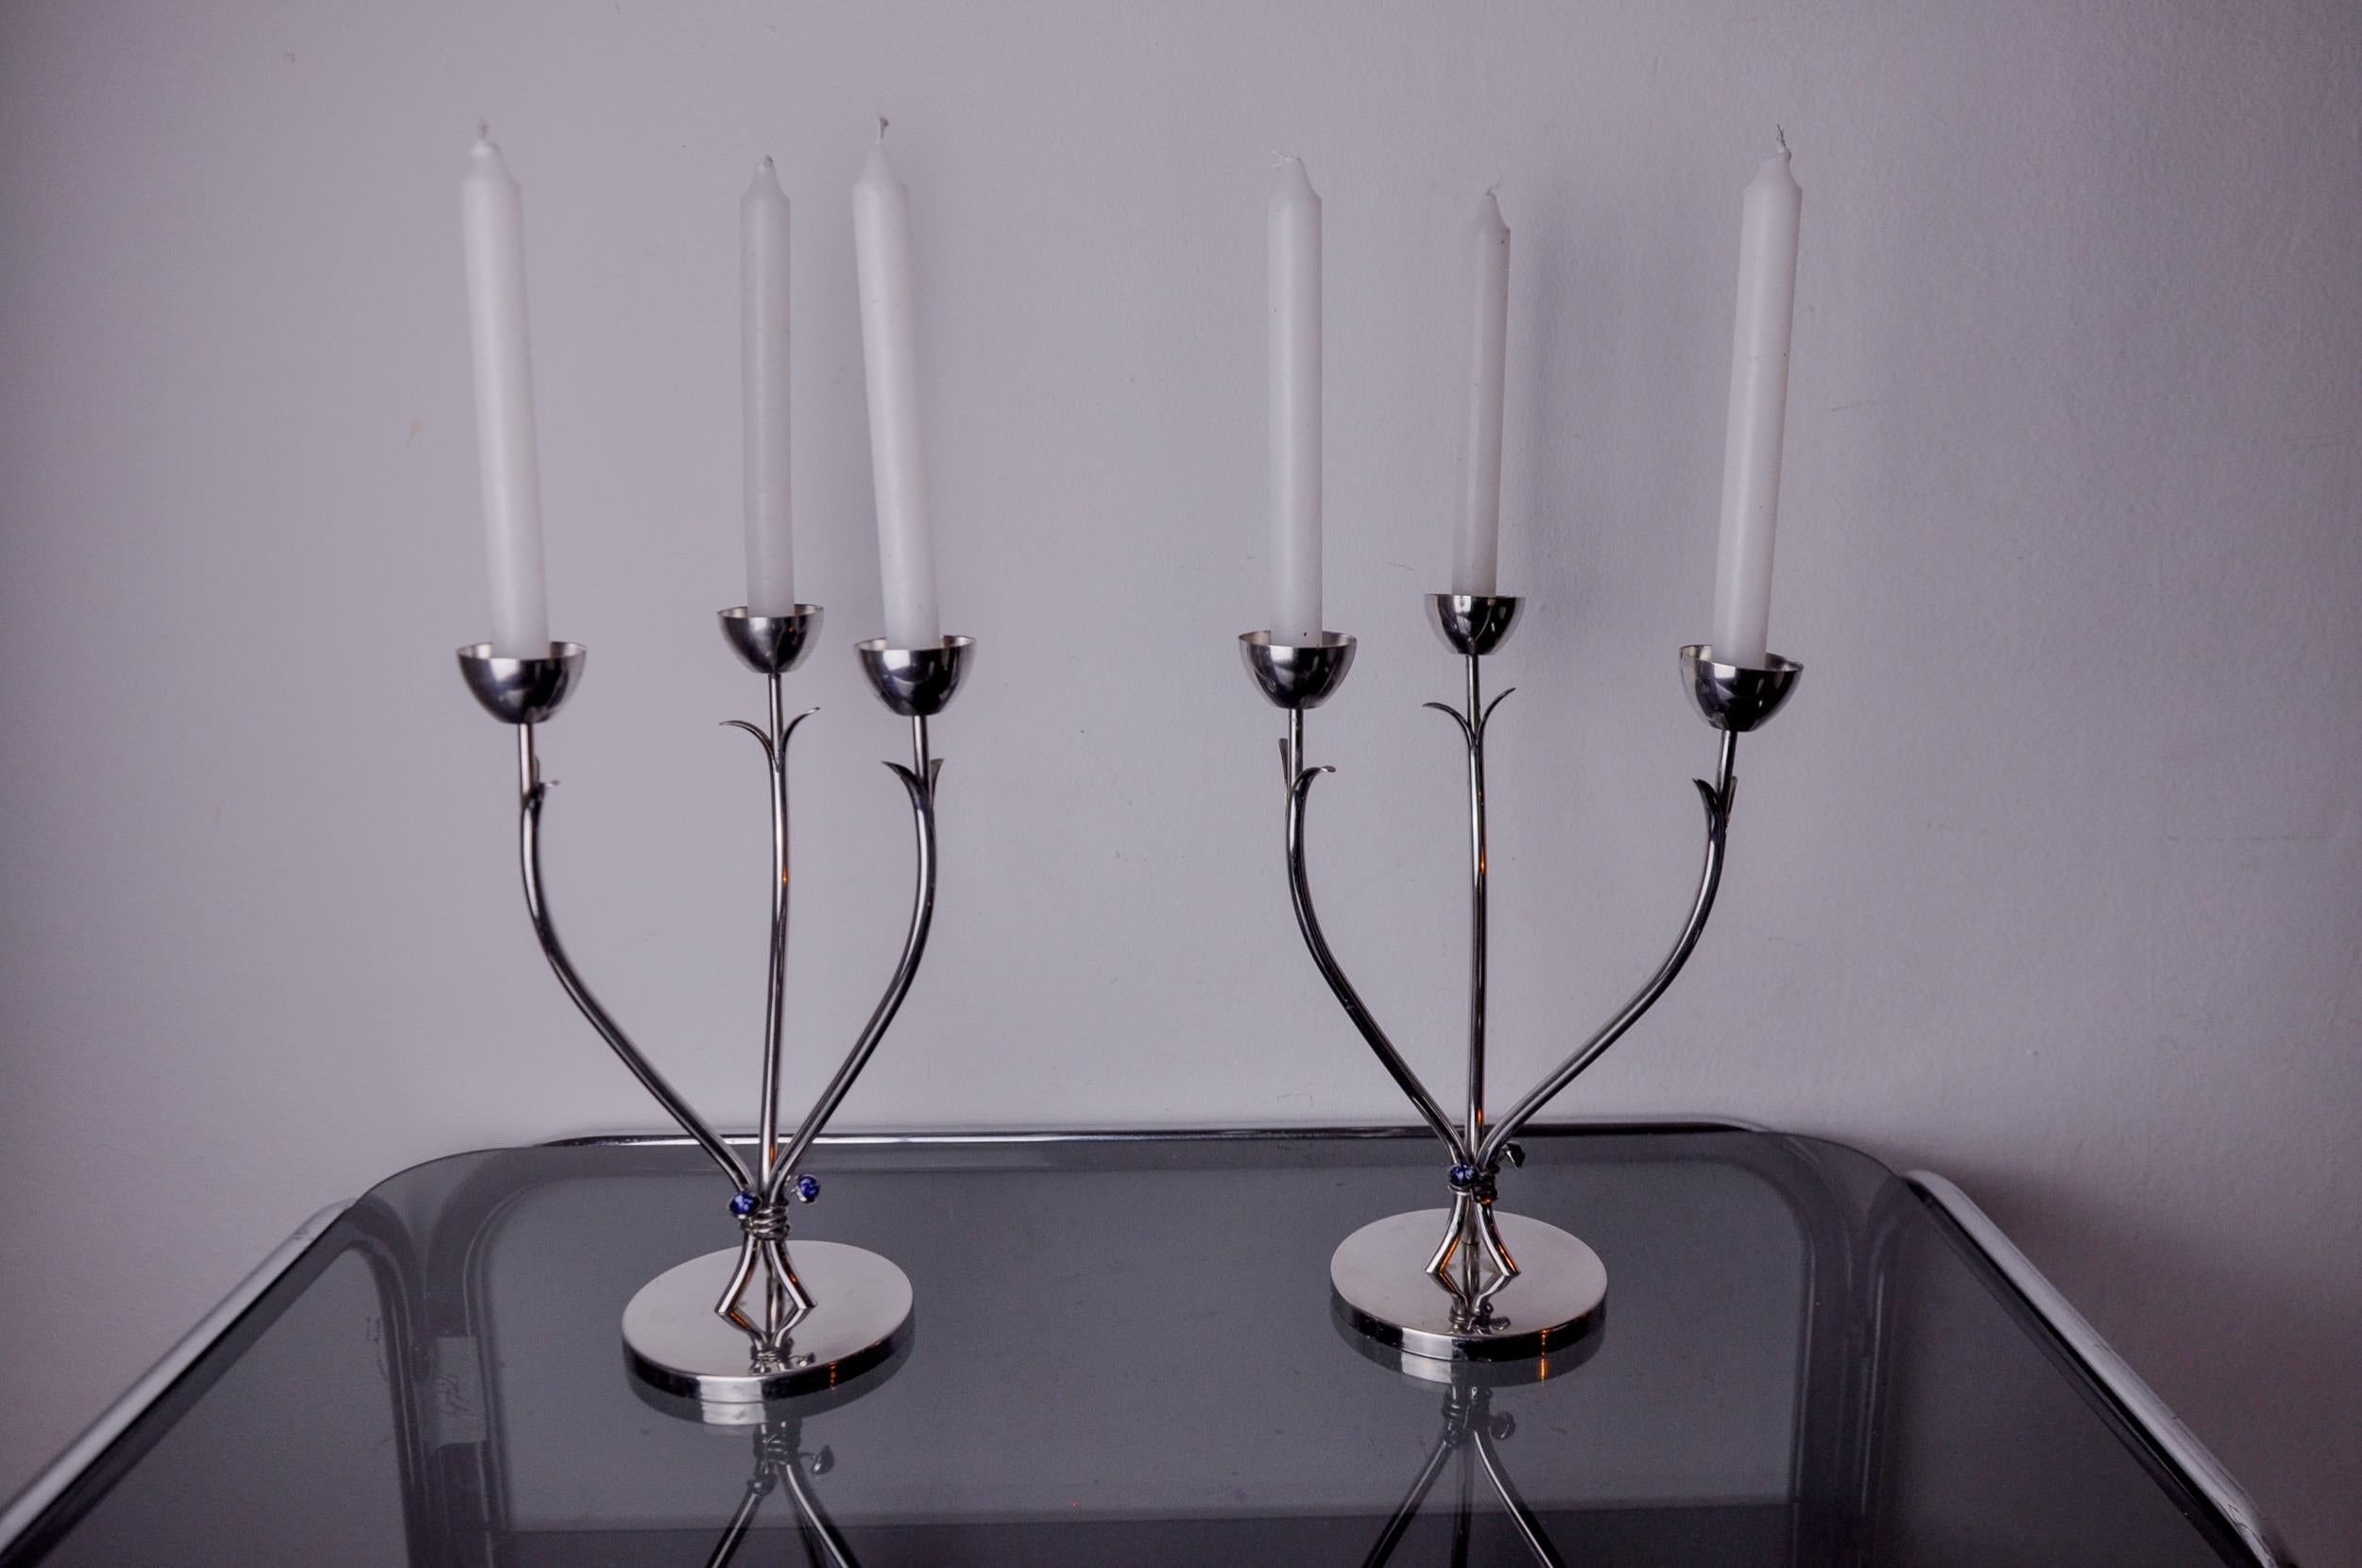 Superb pair of art deco stainless steel candlesticks designed and produced in Spain in the 1970s. Structure in 18/8 stainless steel that can accommodate 3 candles decorated with two blue stones. Superb designer object which will decorate your